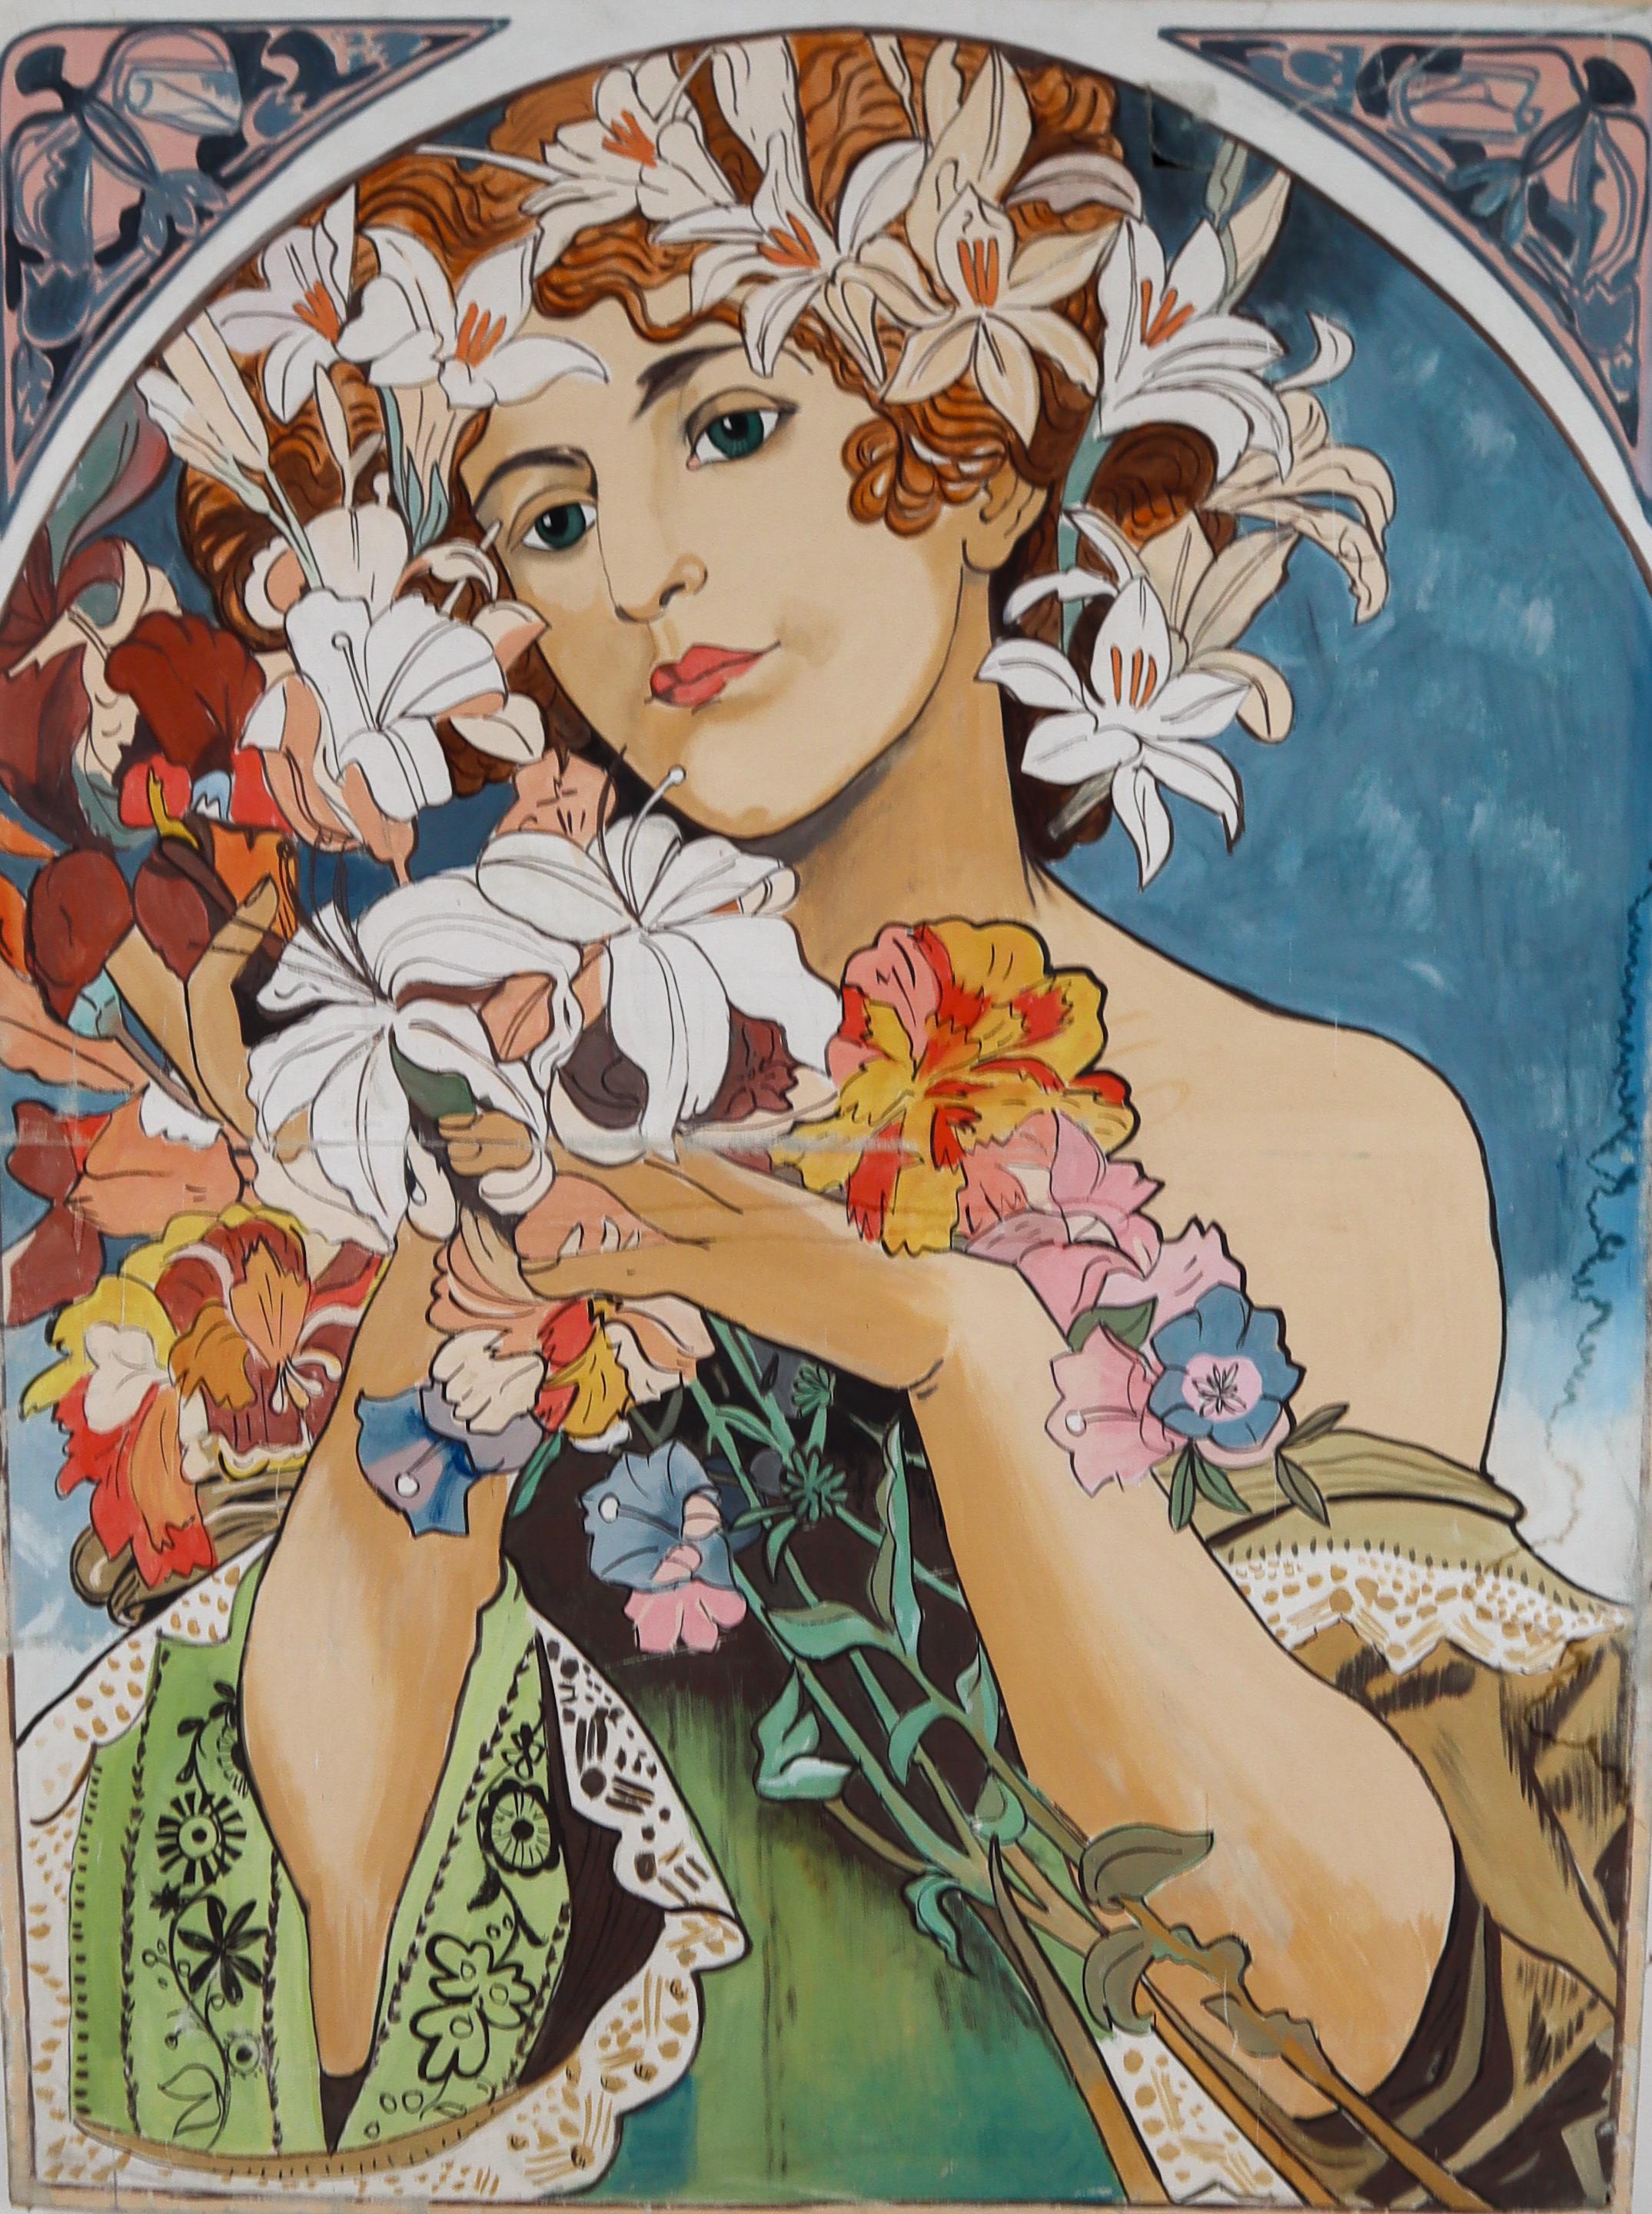 This large painting is in the style of Alphonse Mucha, from a famous theather in Prague. It's made of linnen with a wooden frame in paint. 
His style is characterized by the elegant lines, fresh pastel colors and lush motifs. His works are